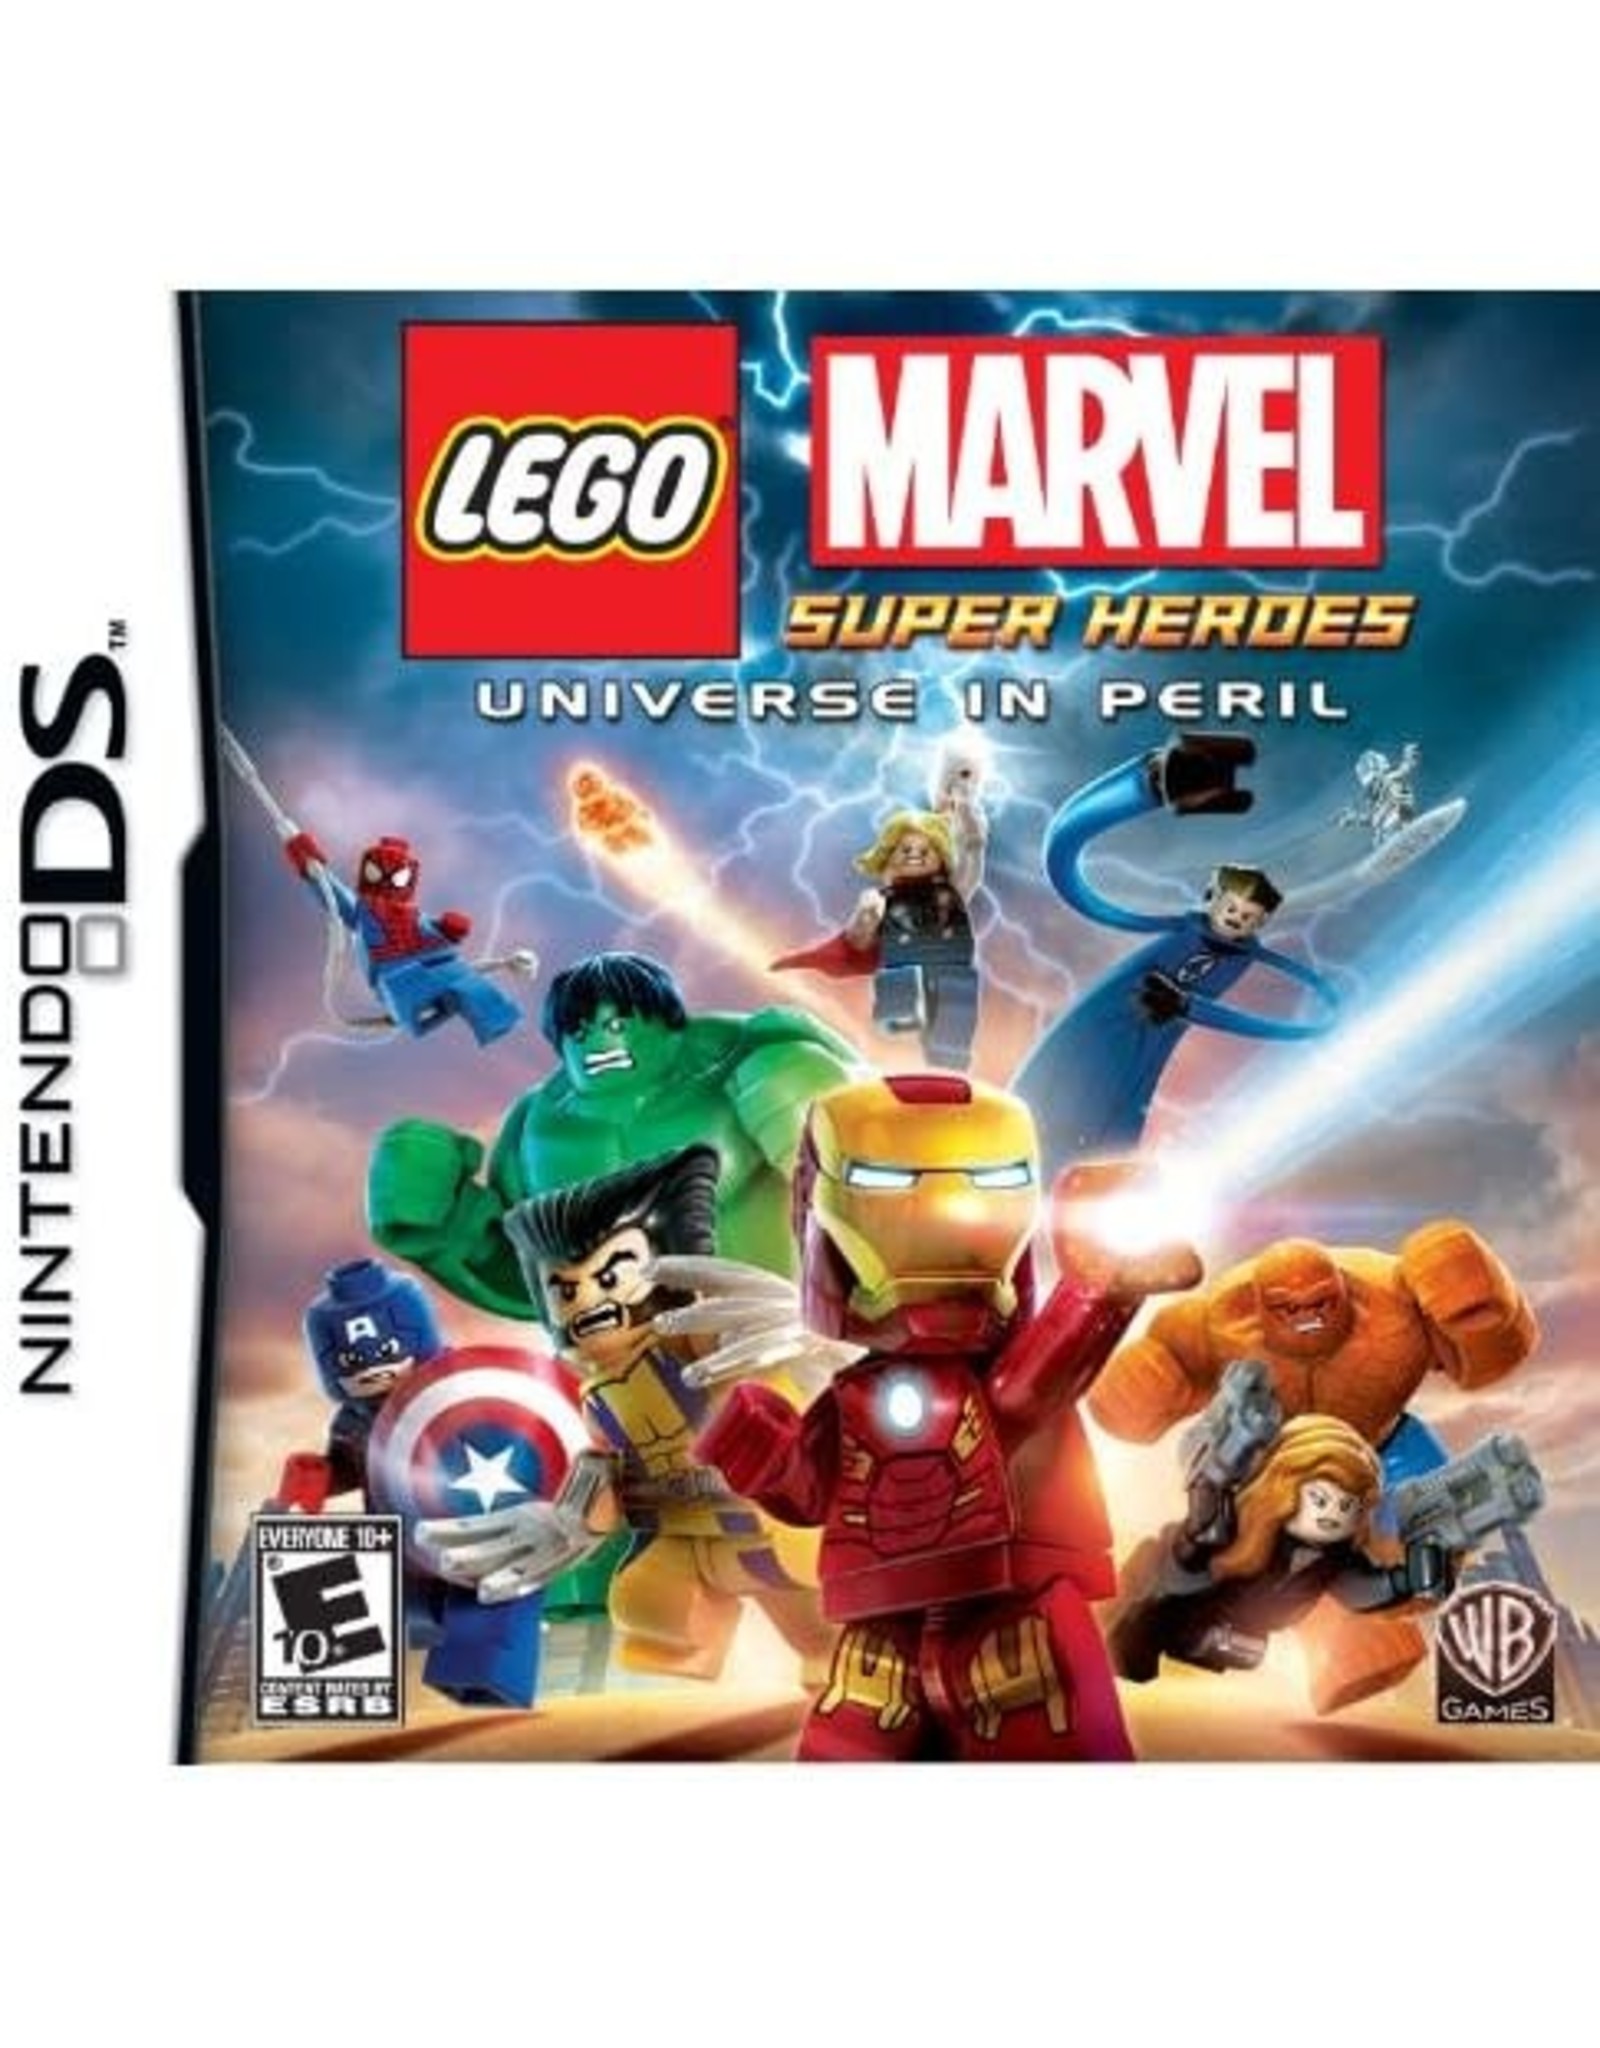 Nintendo DS LEGO Marvel Super Heroes: Universe in Peril (Cart Only)